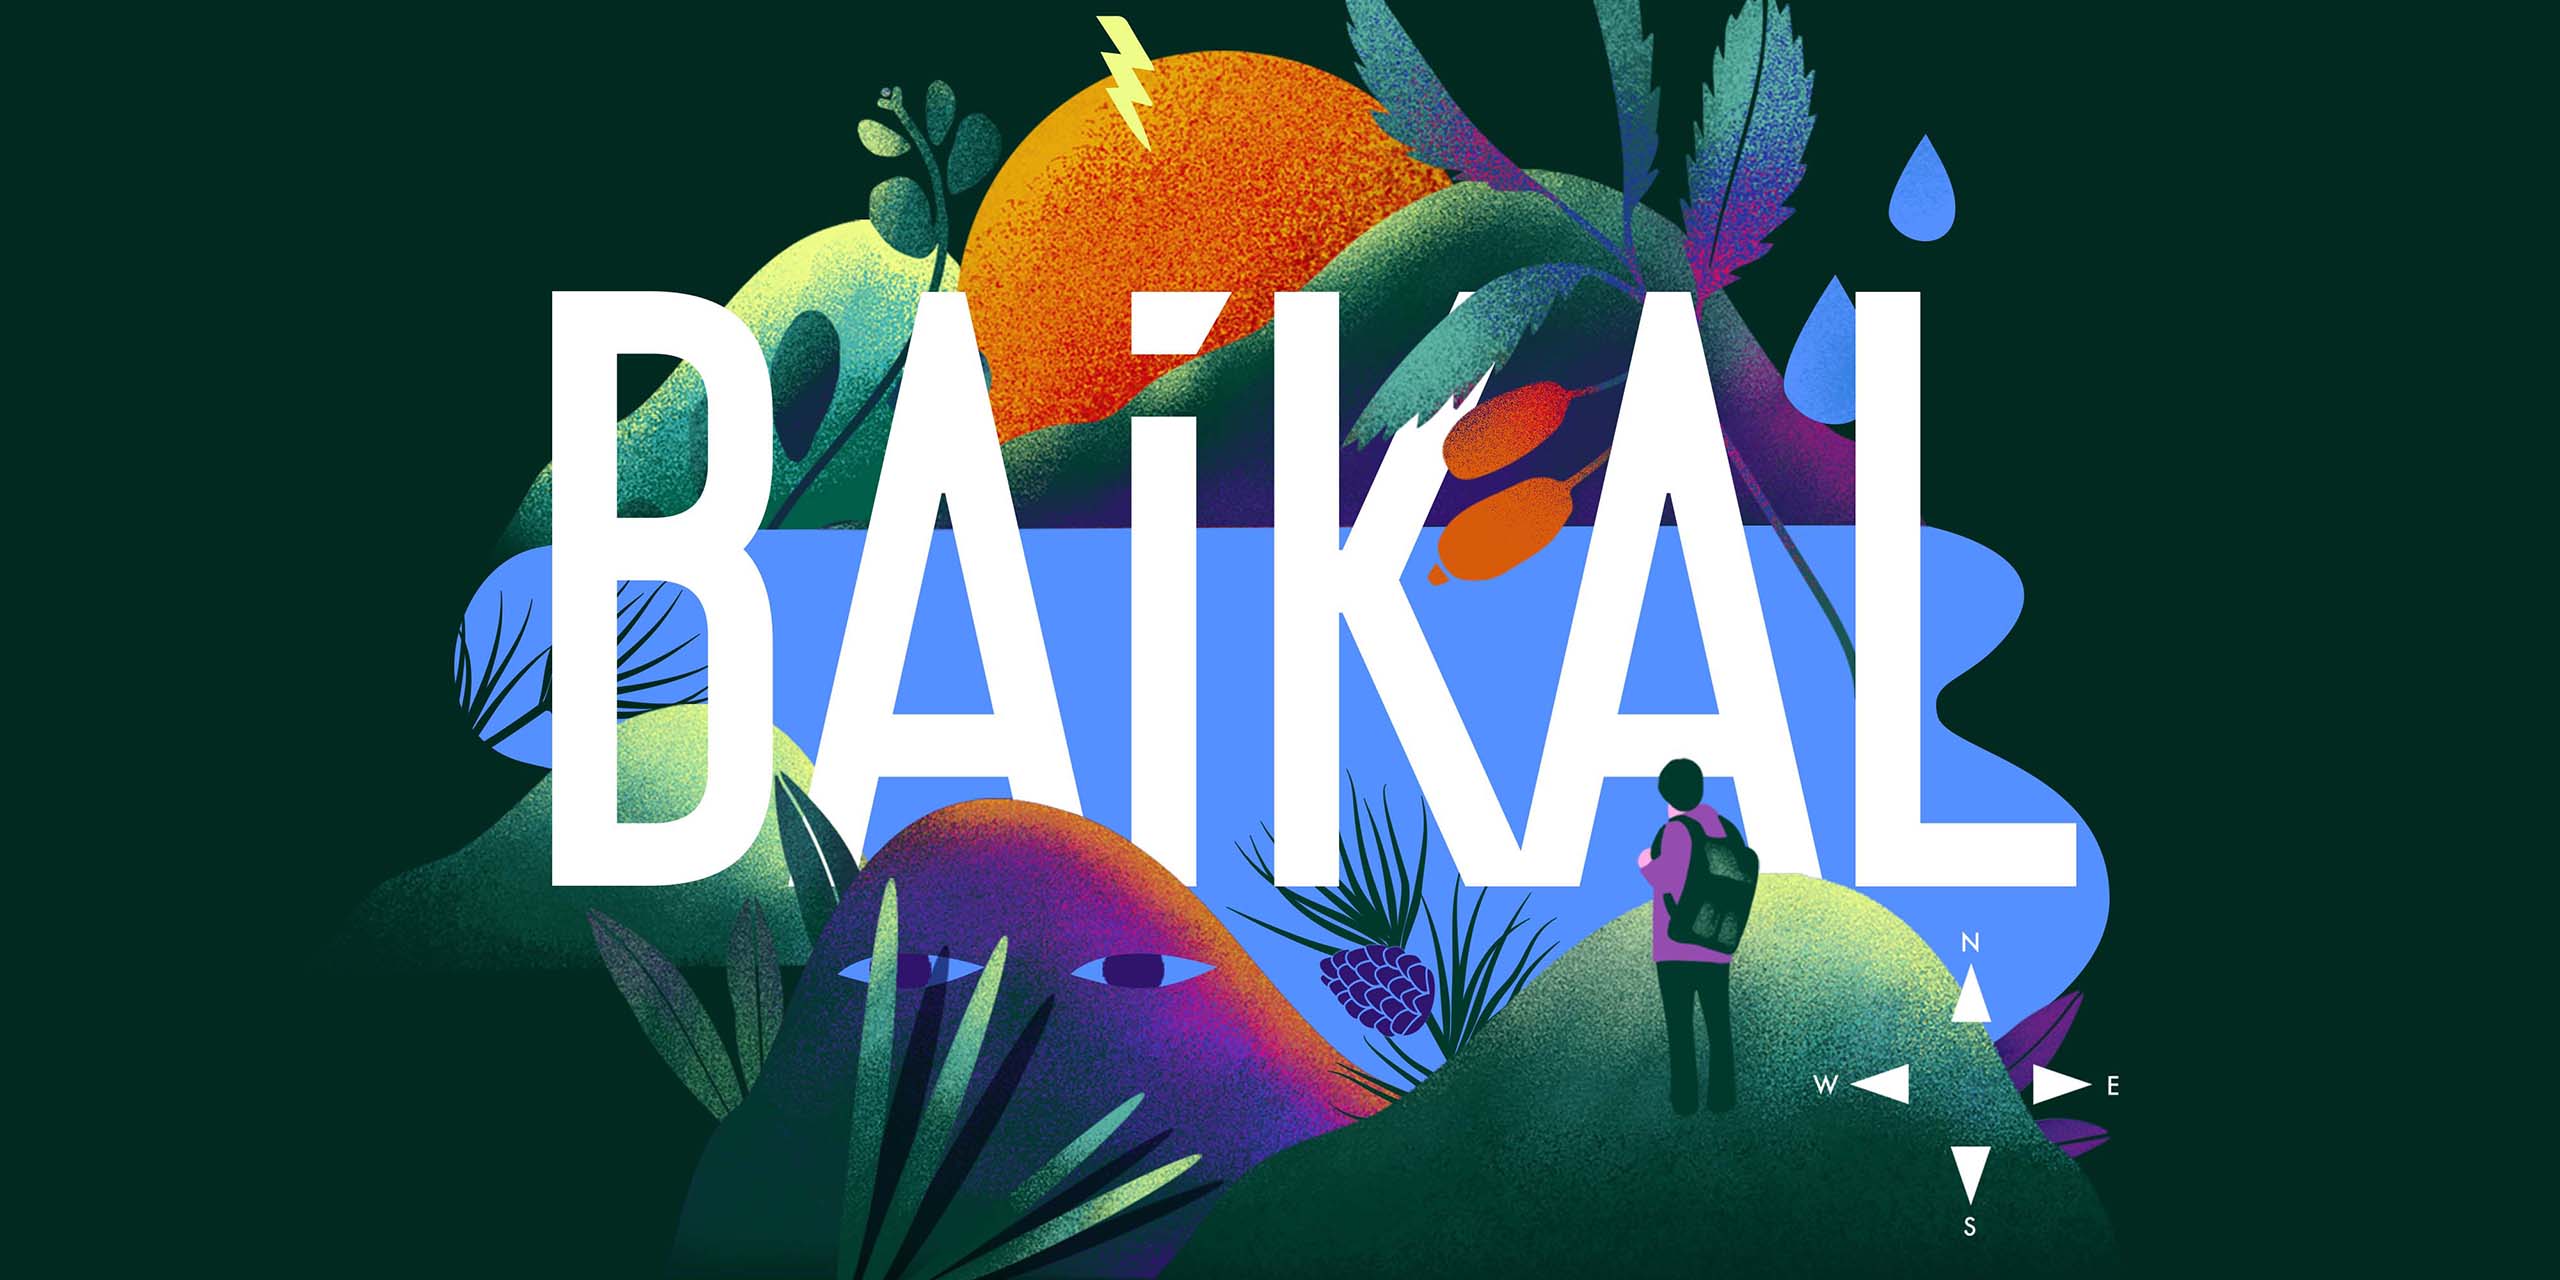 Together with the Chernogolovka team, we relaunched Baikal 1977 by creating a new brand visual image that goes hand in hand with the platform - a natural source of inspiration